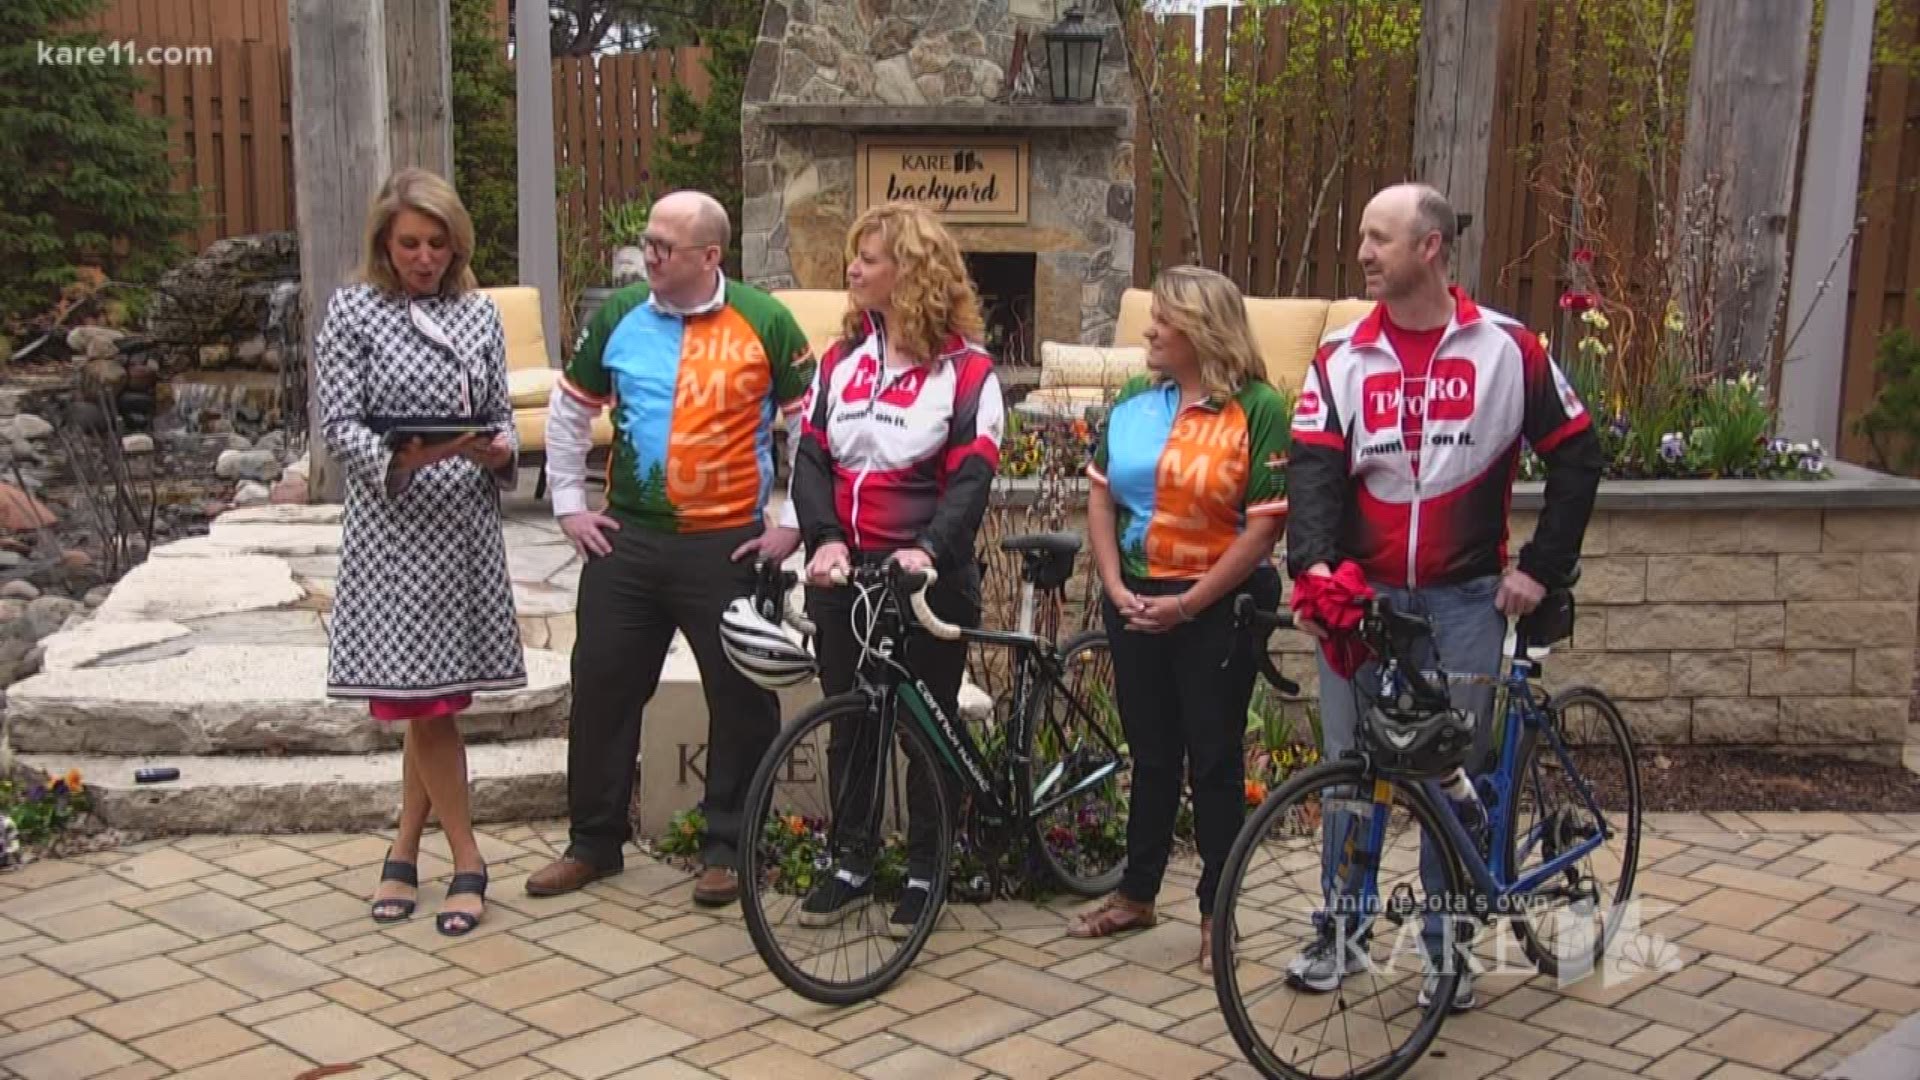 Thousands of bikers will hit the road to raise money to end MS.